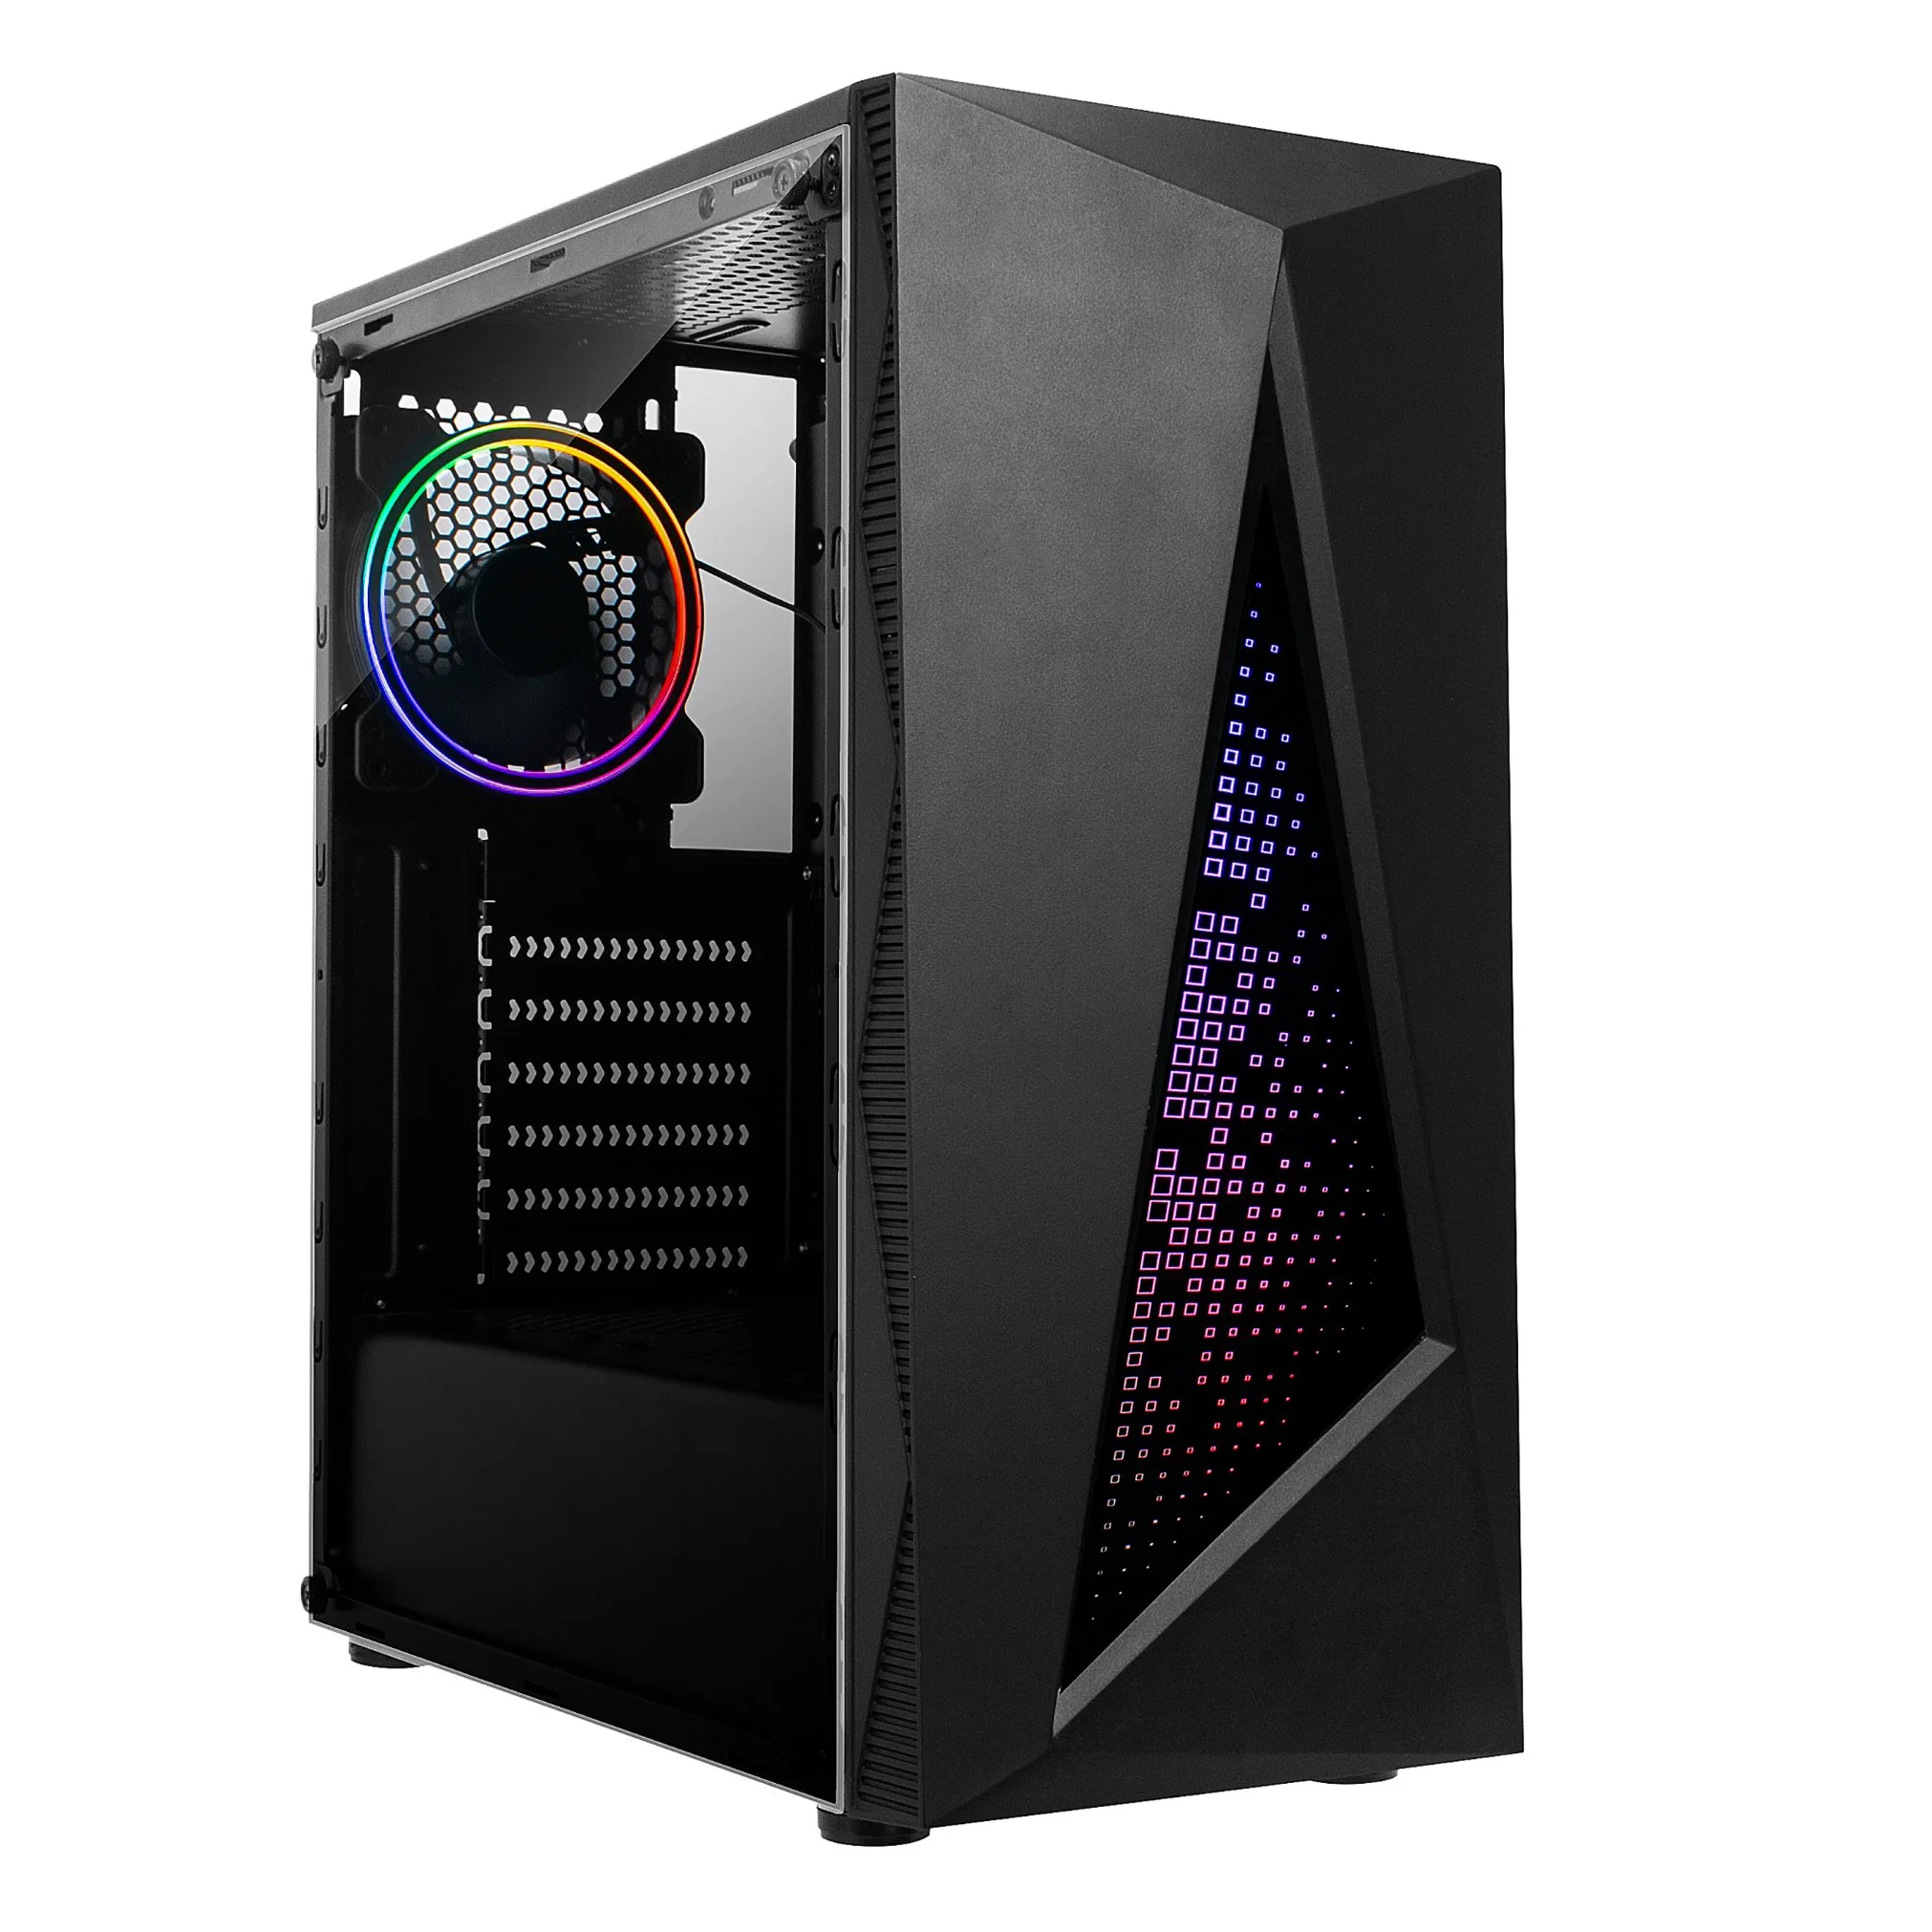 Fshion ATX Tower PC Desktop Computer Gaming Case with Sparkling Lights